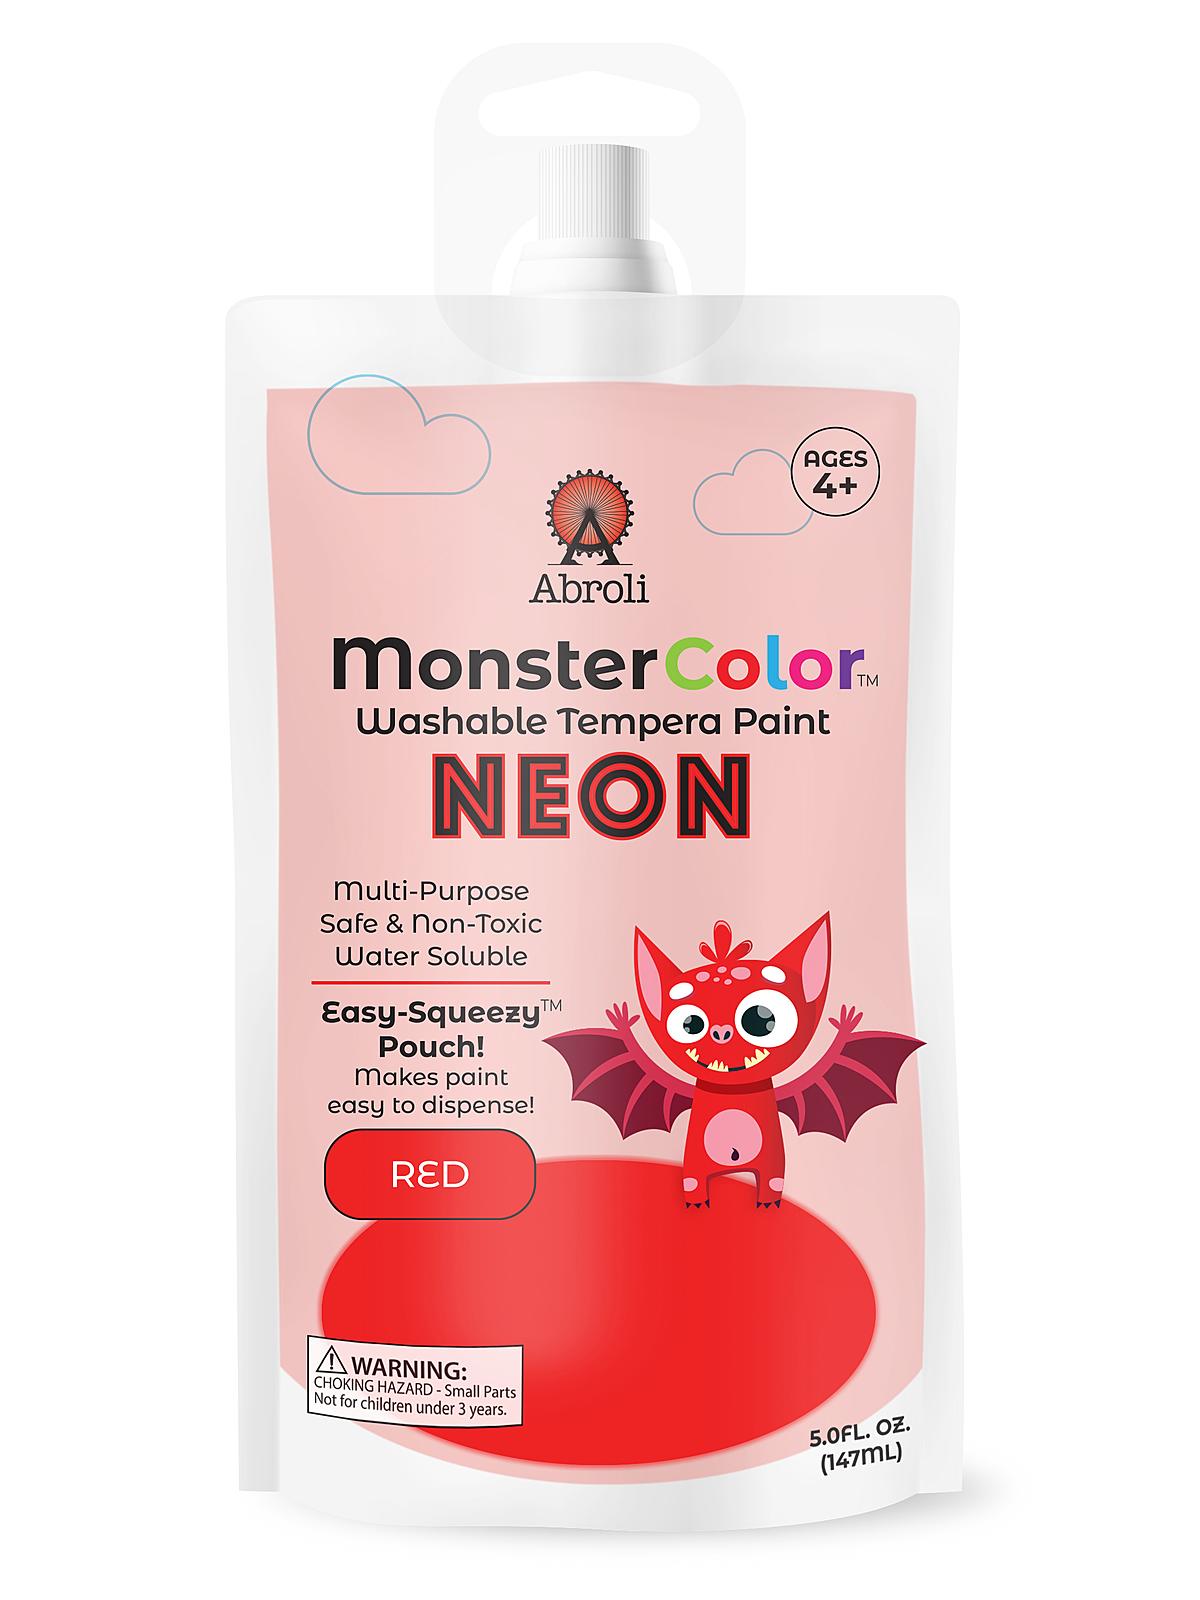 Monster Color Tempera Paint Neon Red 5 Oz. Pouch